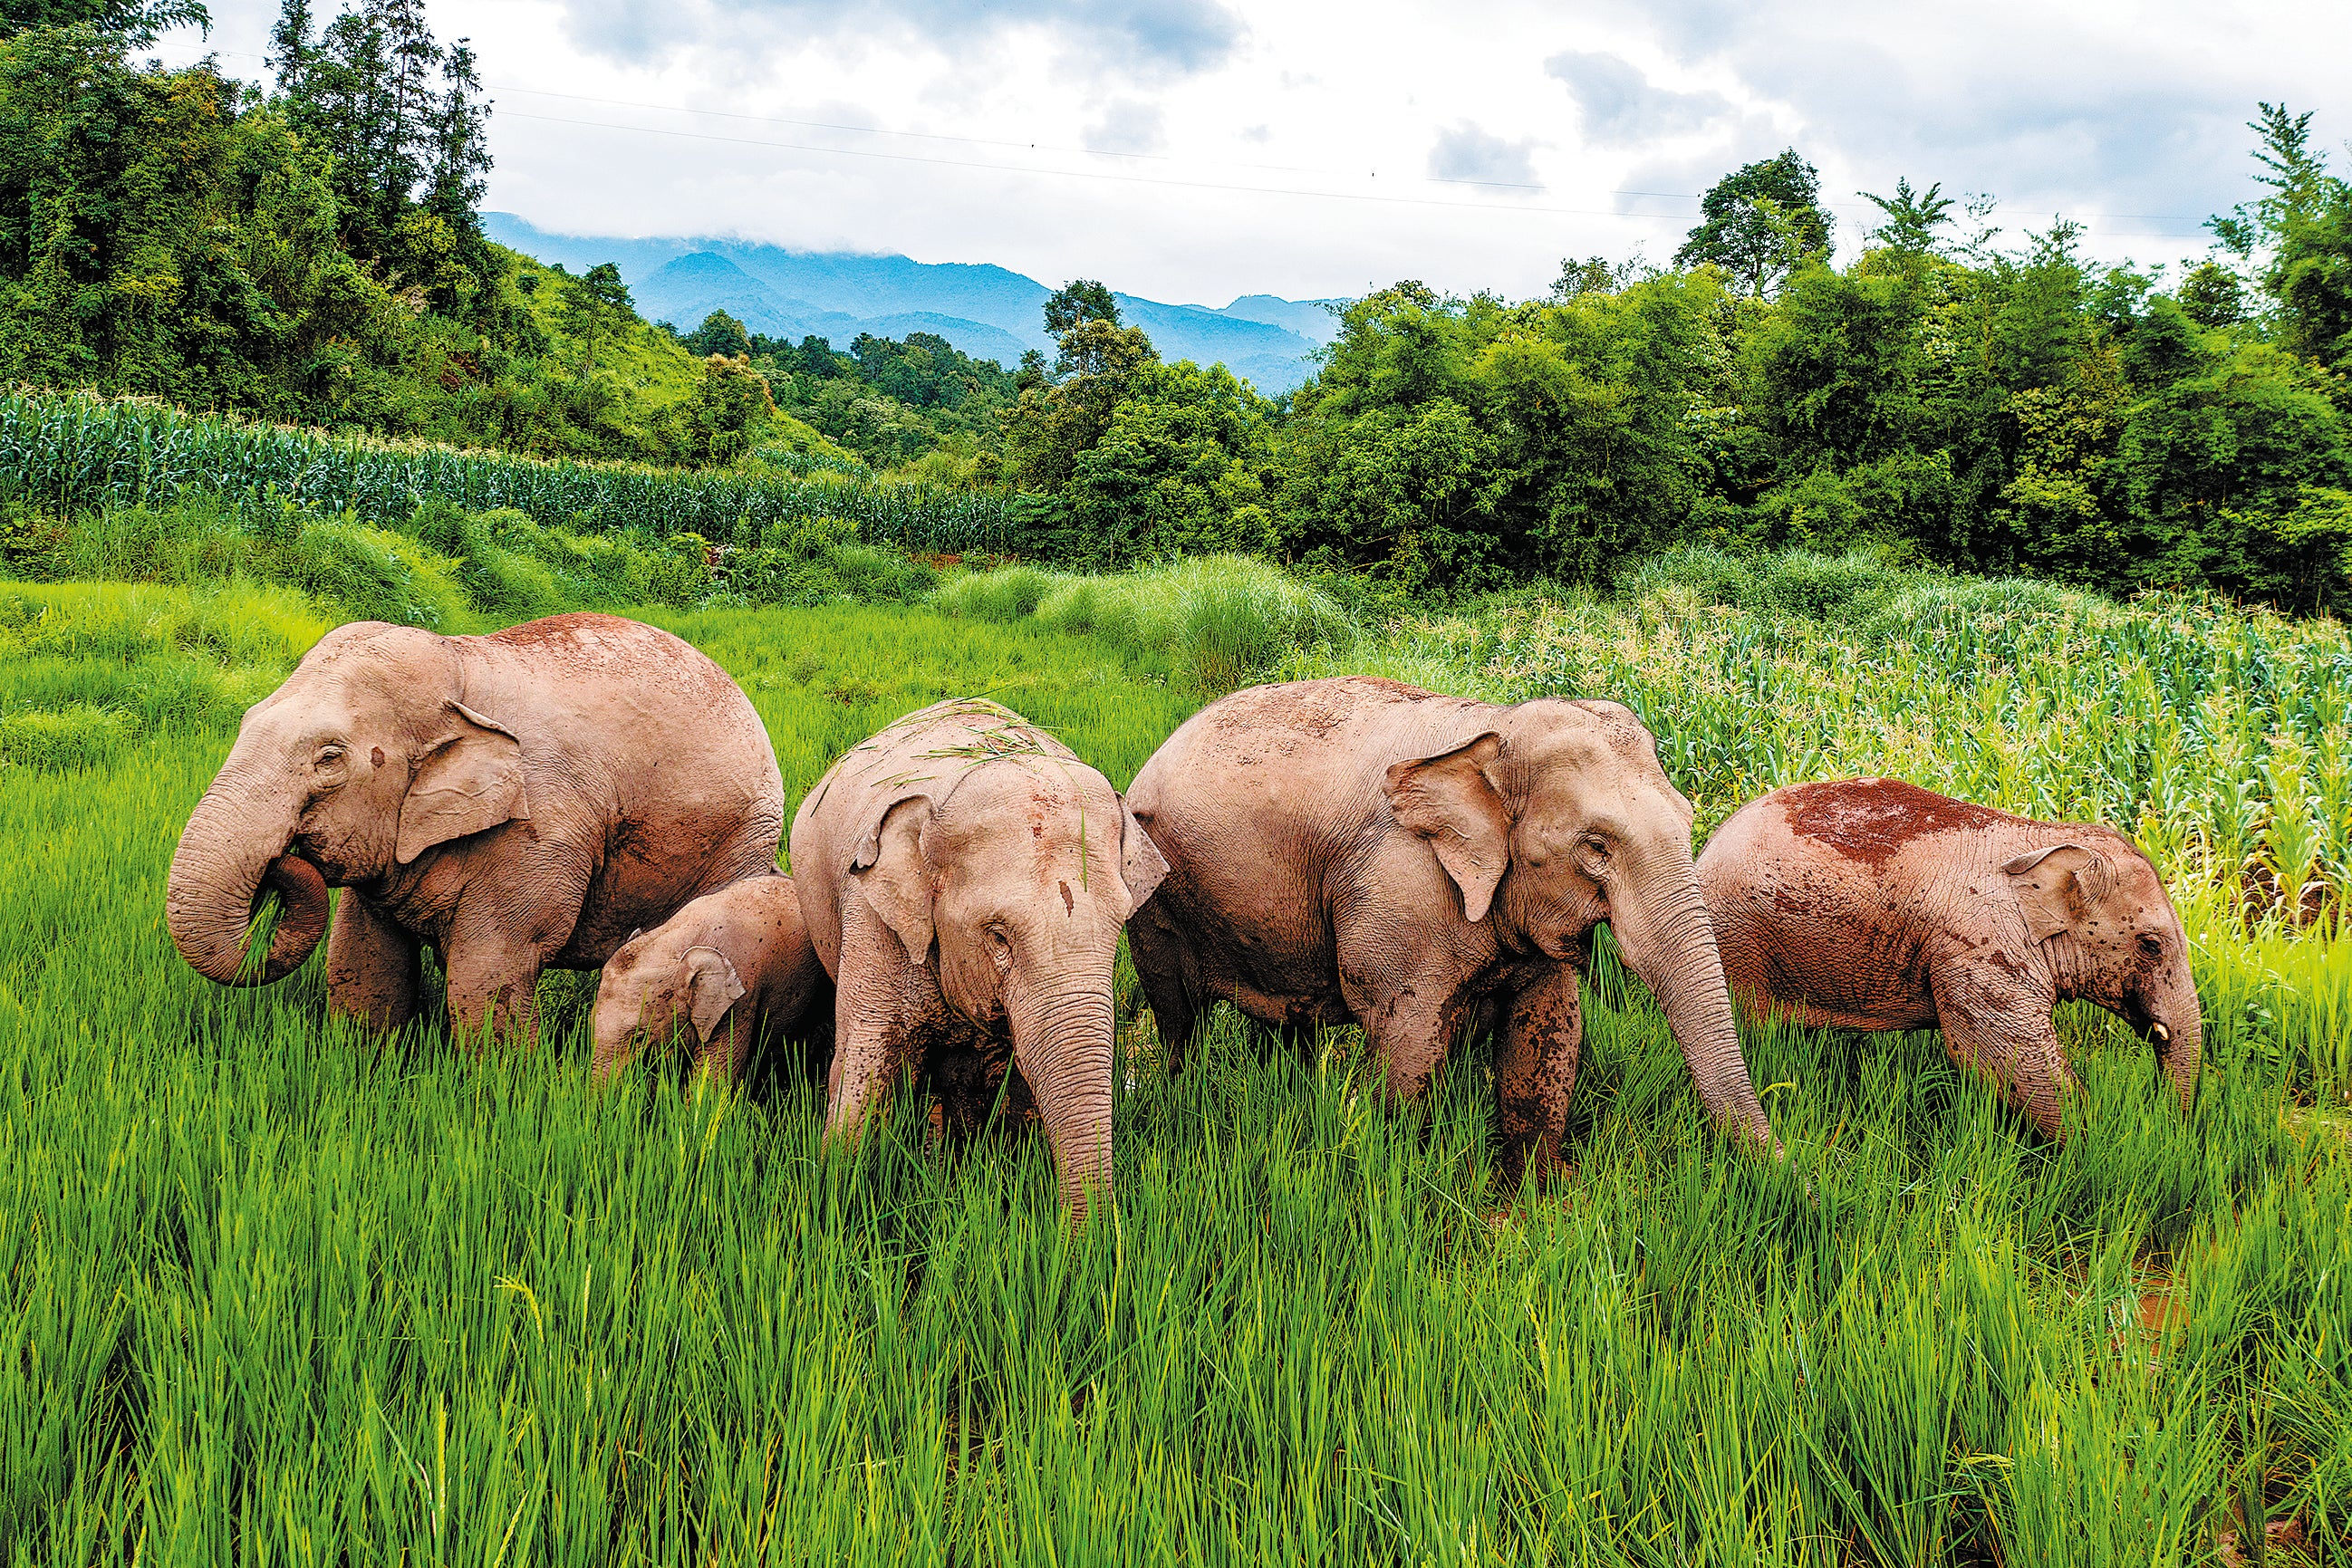 A group of Asian elephants forage for food at a rice field in Yunnan